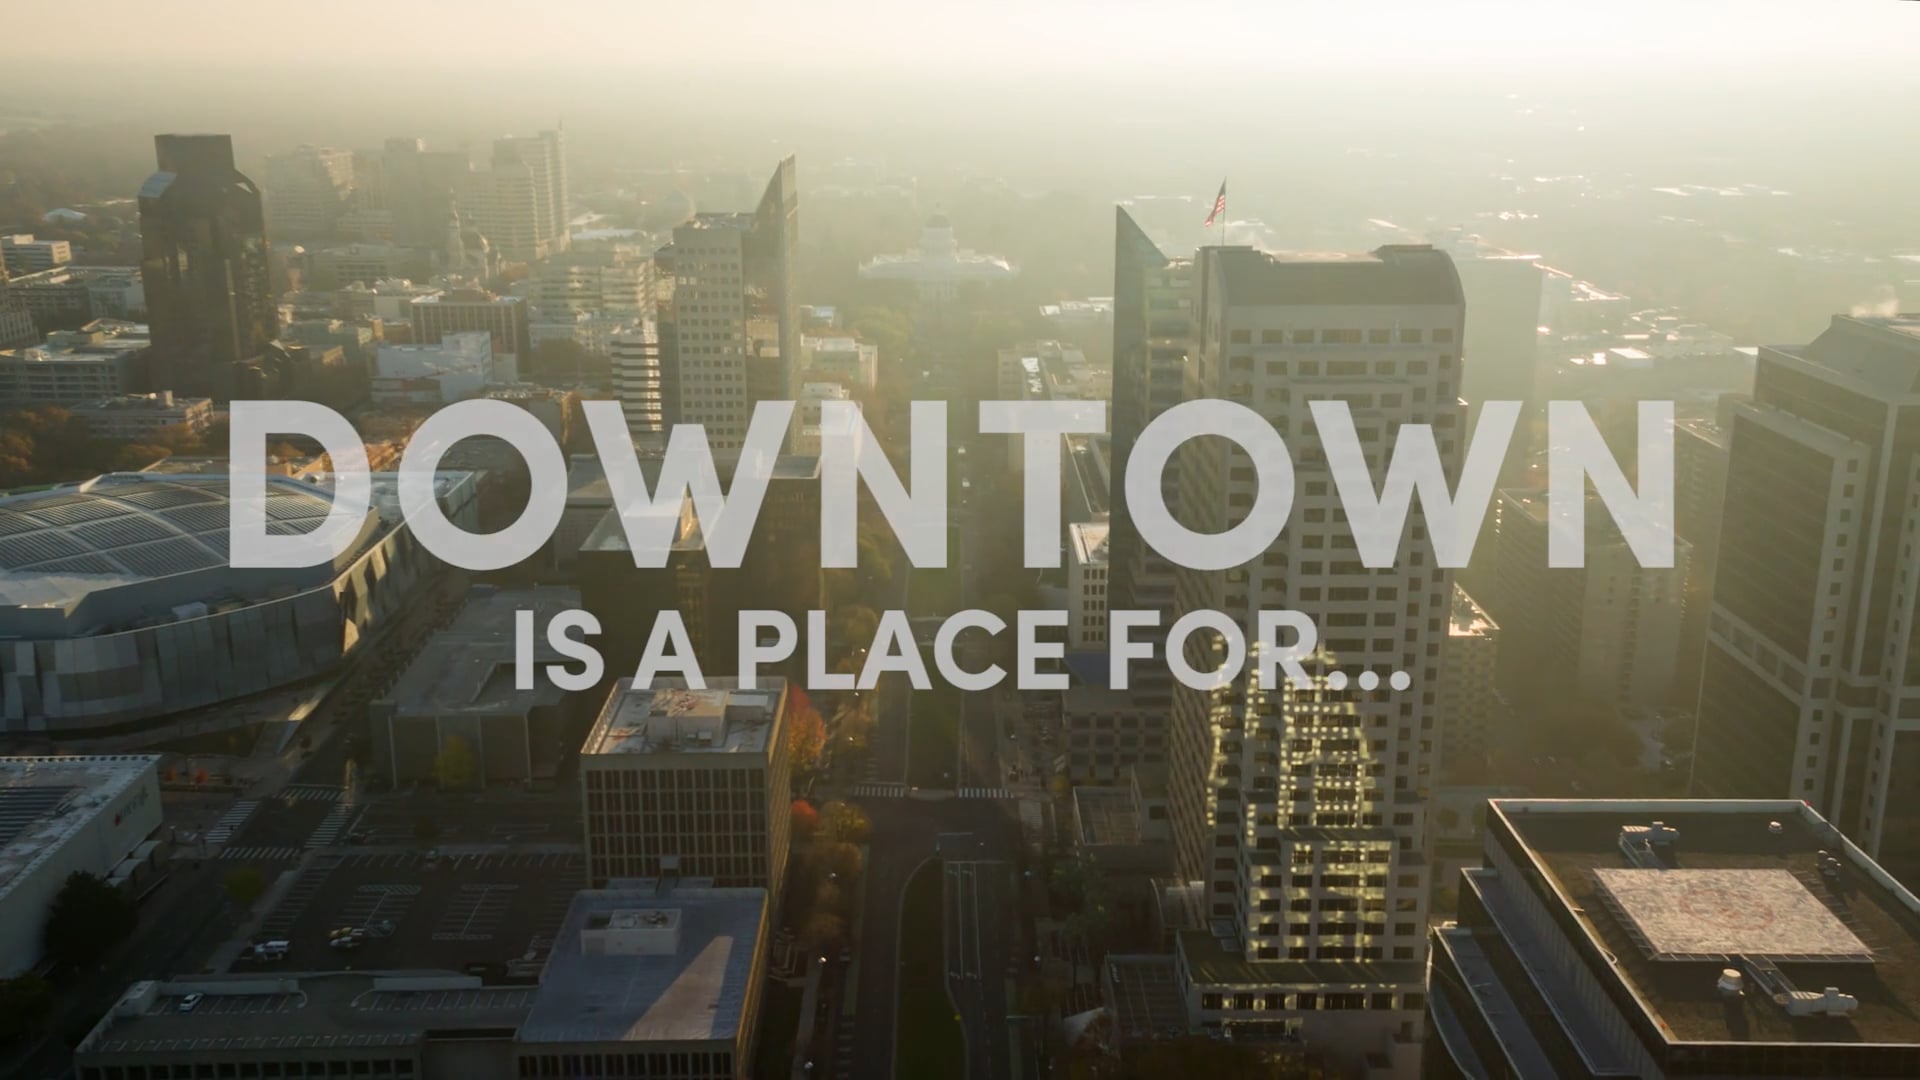 This is our Downtown!